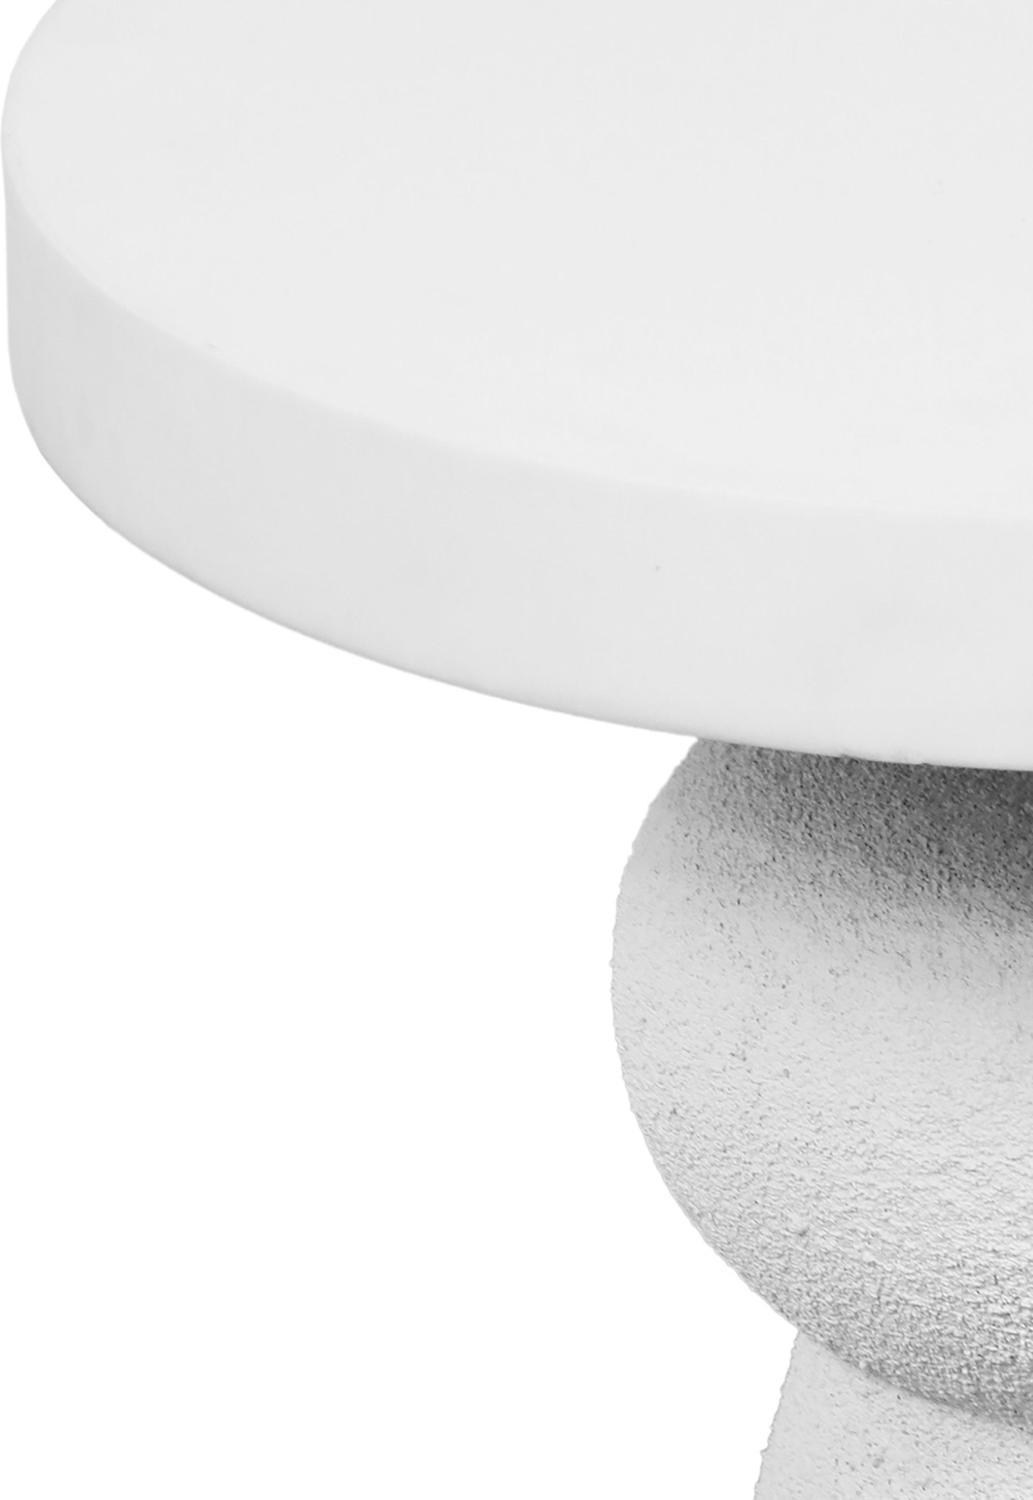 table buy Contemporary Design Furniture Side Tables White